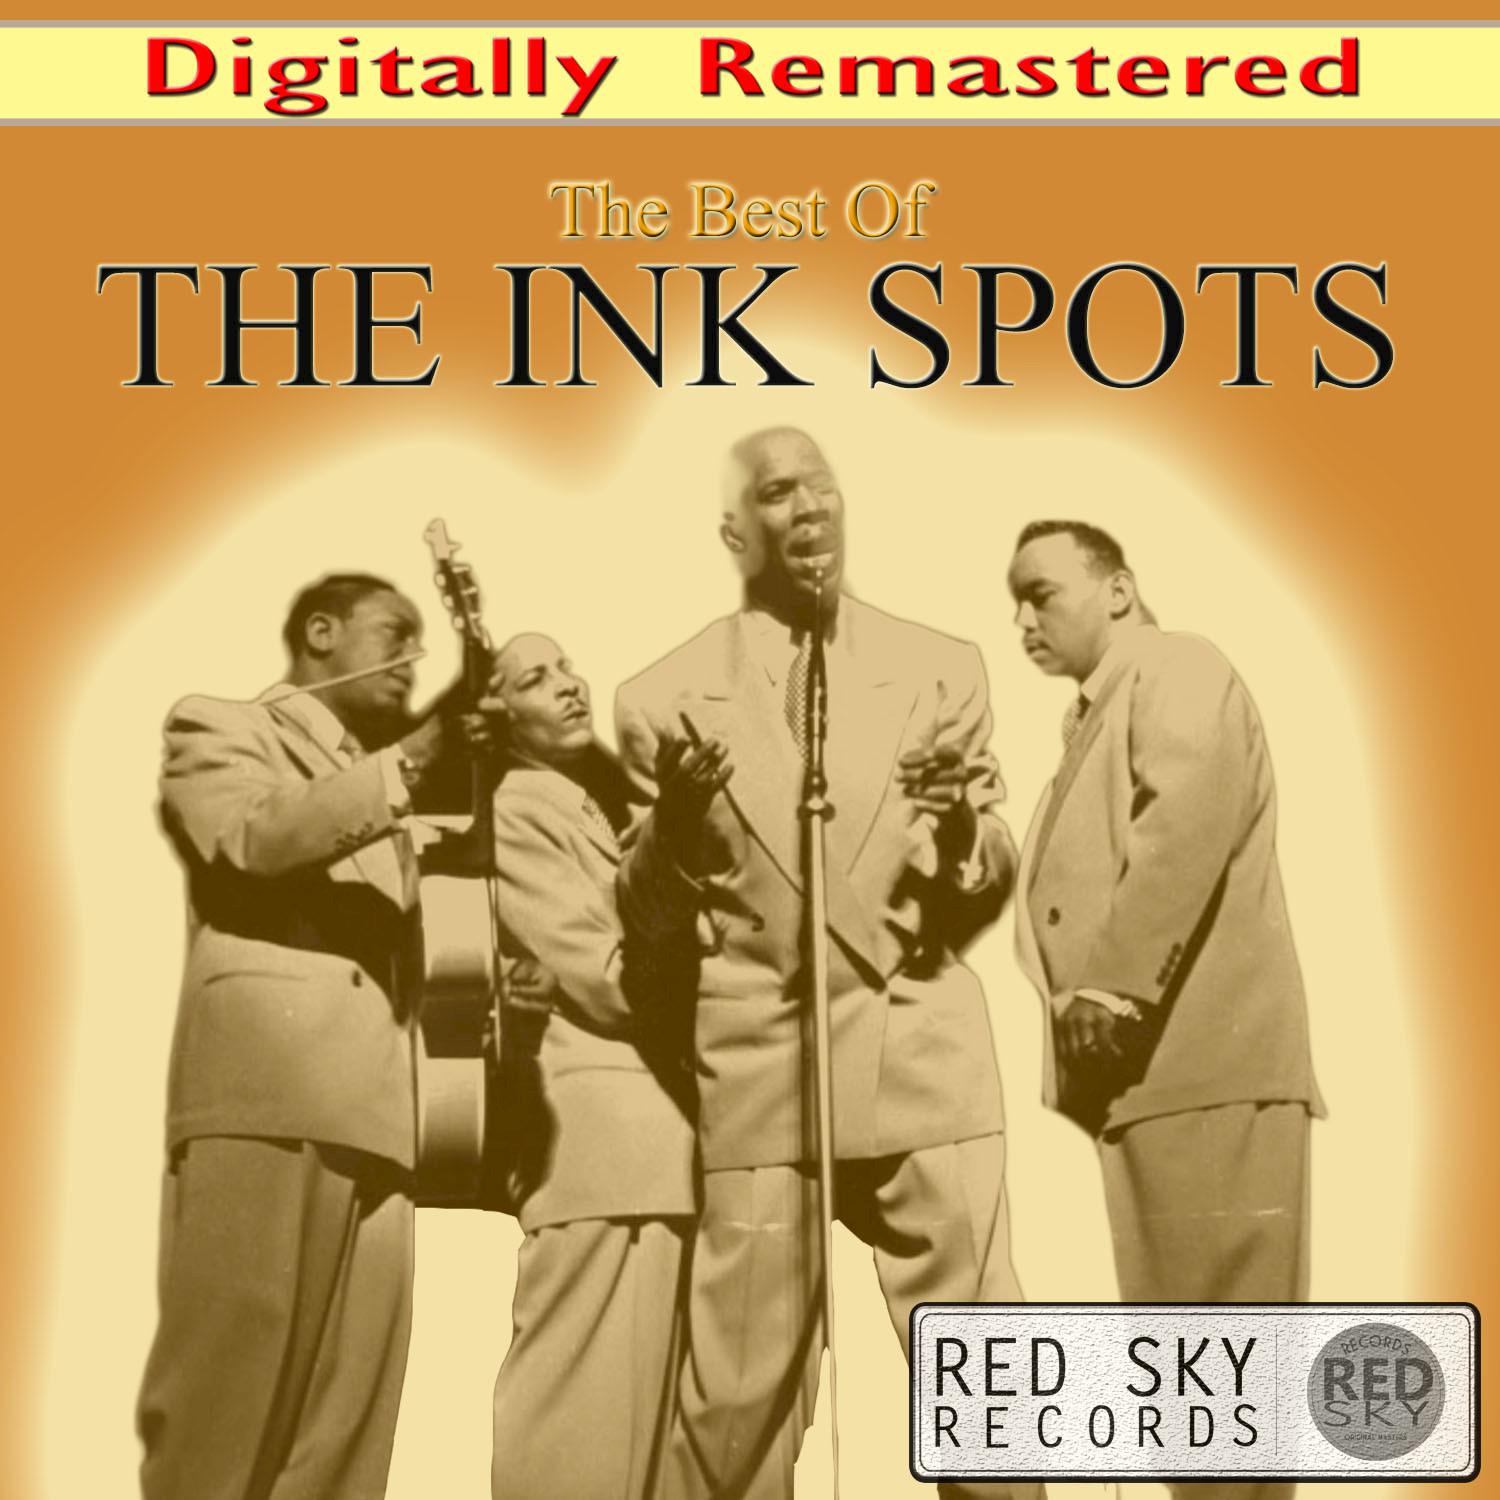 The Best of The Ink Spots (Digitally Remastered)